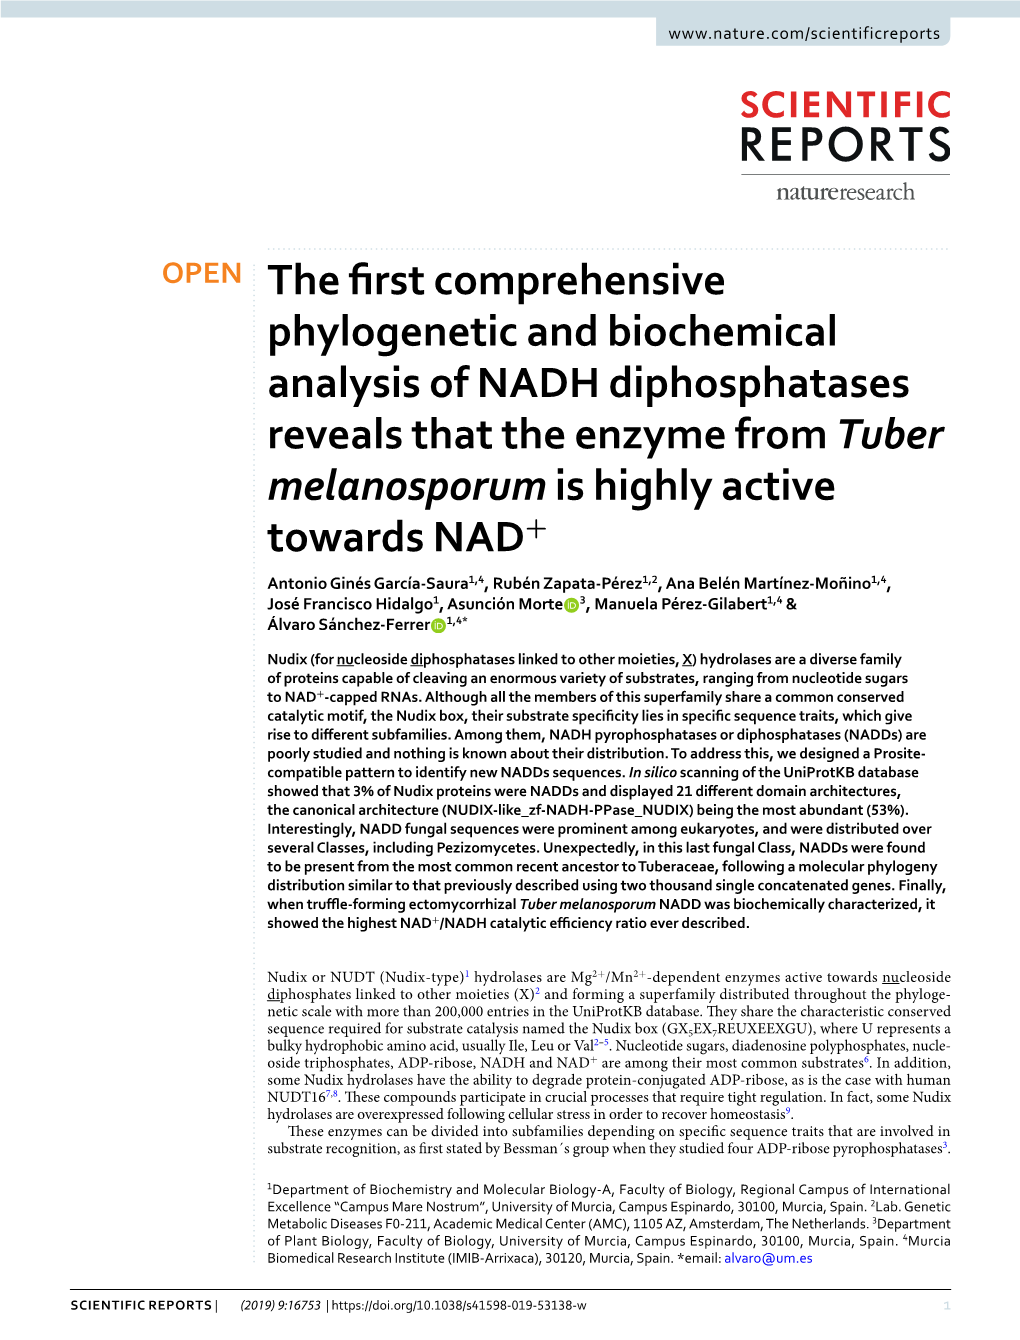 The First Comprehensive Phylogenetic and Biochemical Analysis of NADH Diphosphatases Reveals That the Enzyme from Tuber Melanosporum Is Highly Active Towards NAD+